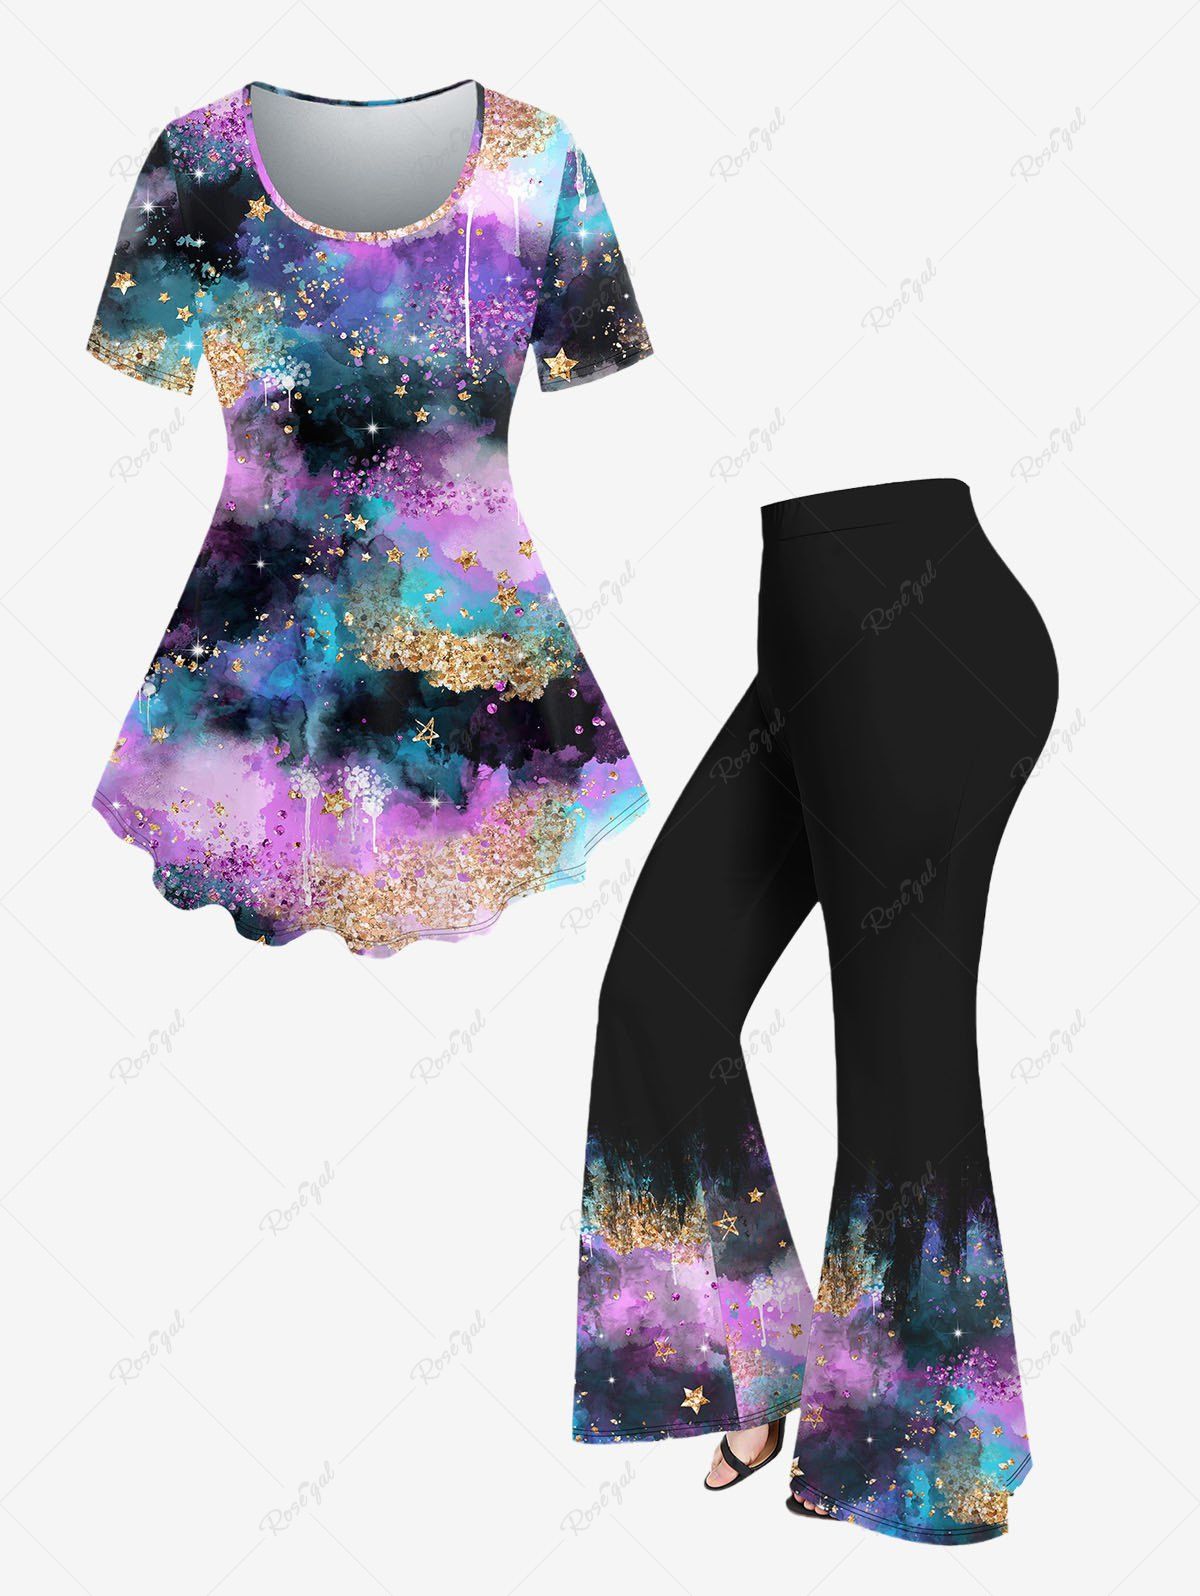 Shops Tie Dye Star Sparkling Sequin Printed T-shirt and Flare Pants Plus Size Disco Outfit  